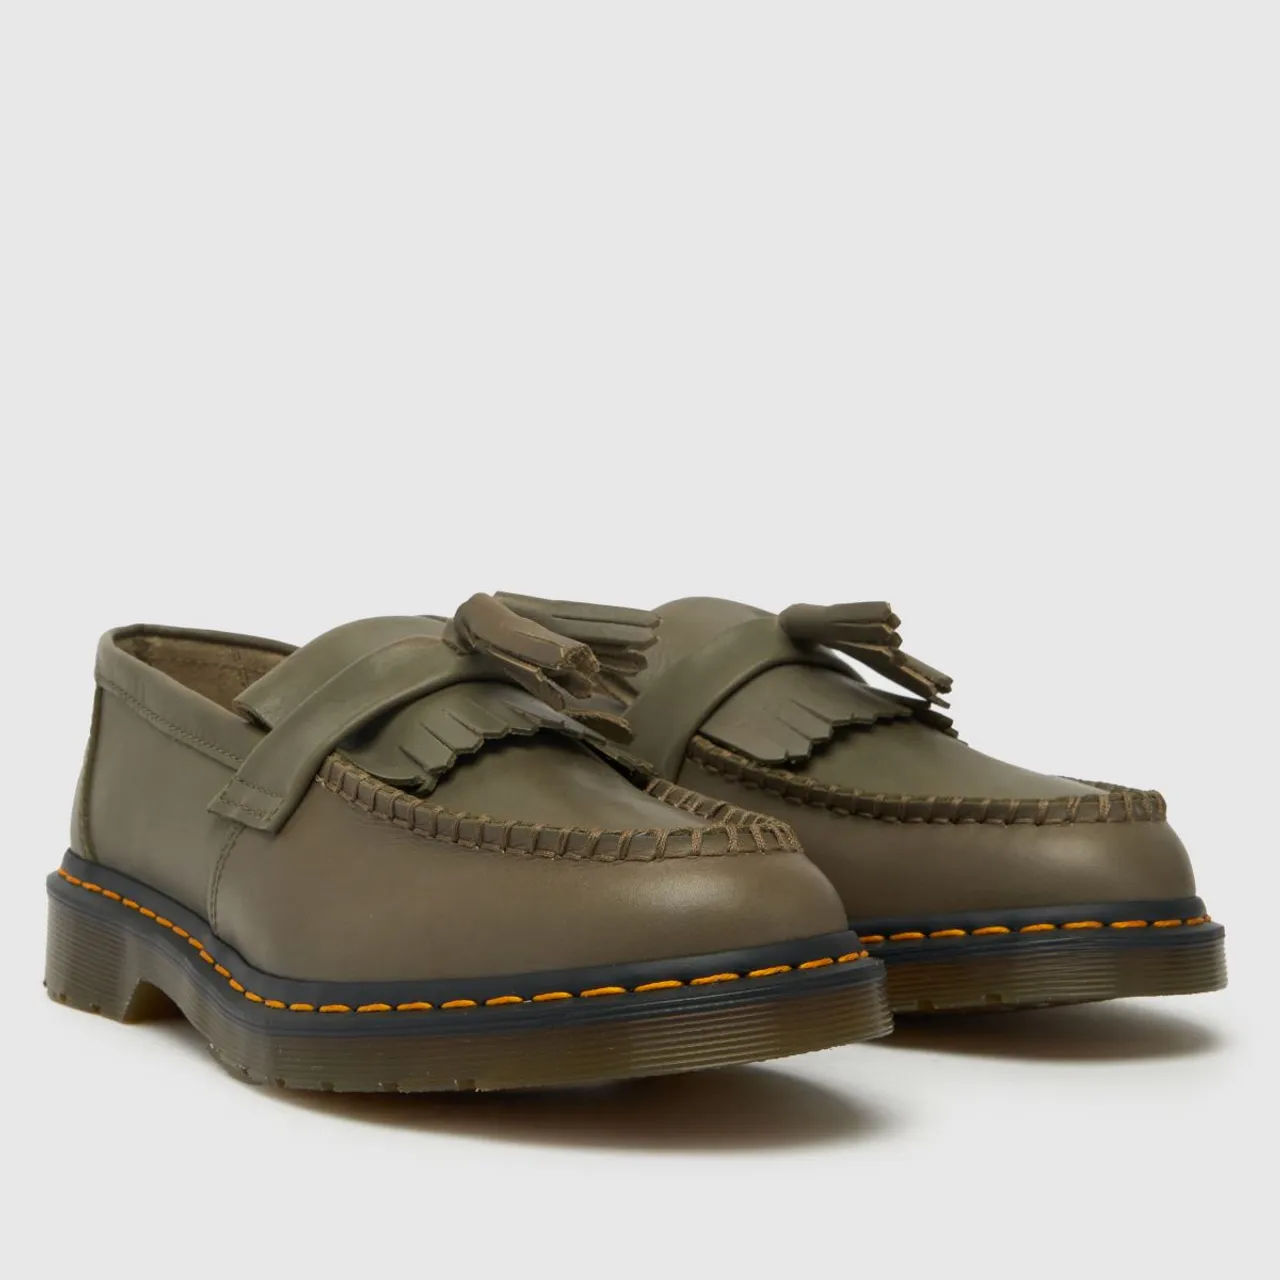 Dr Martens Adrian Yellow Stitch Loafer Shoes In Khaki